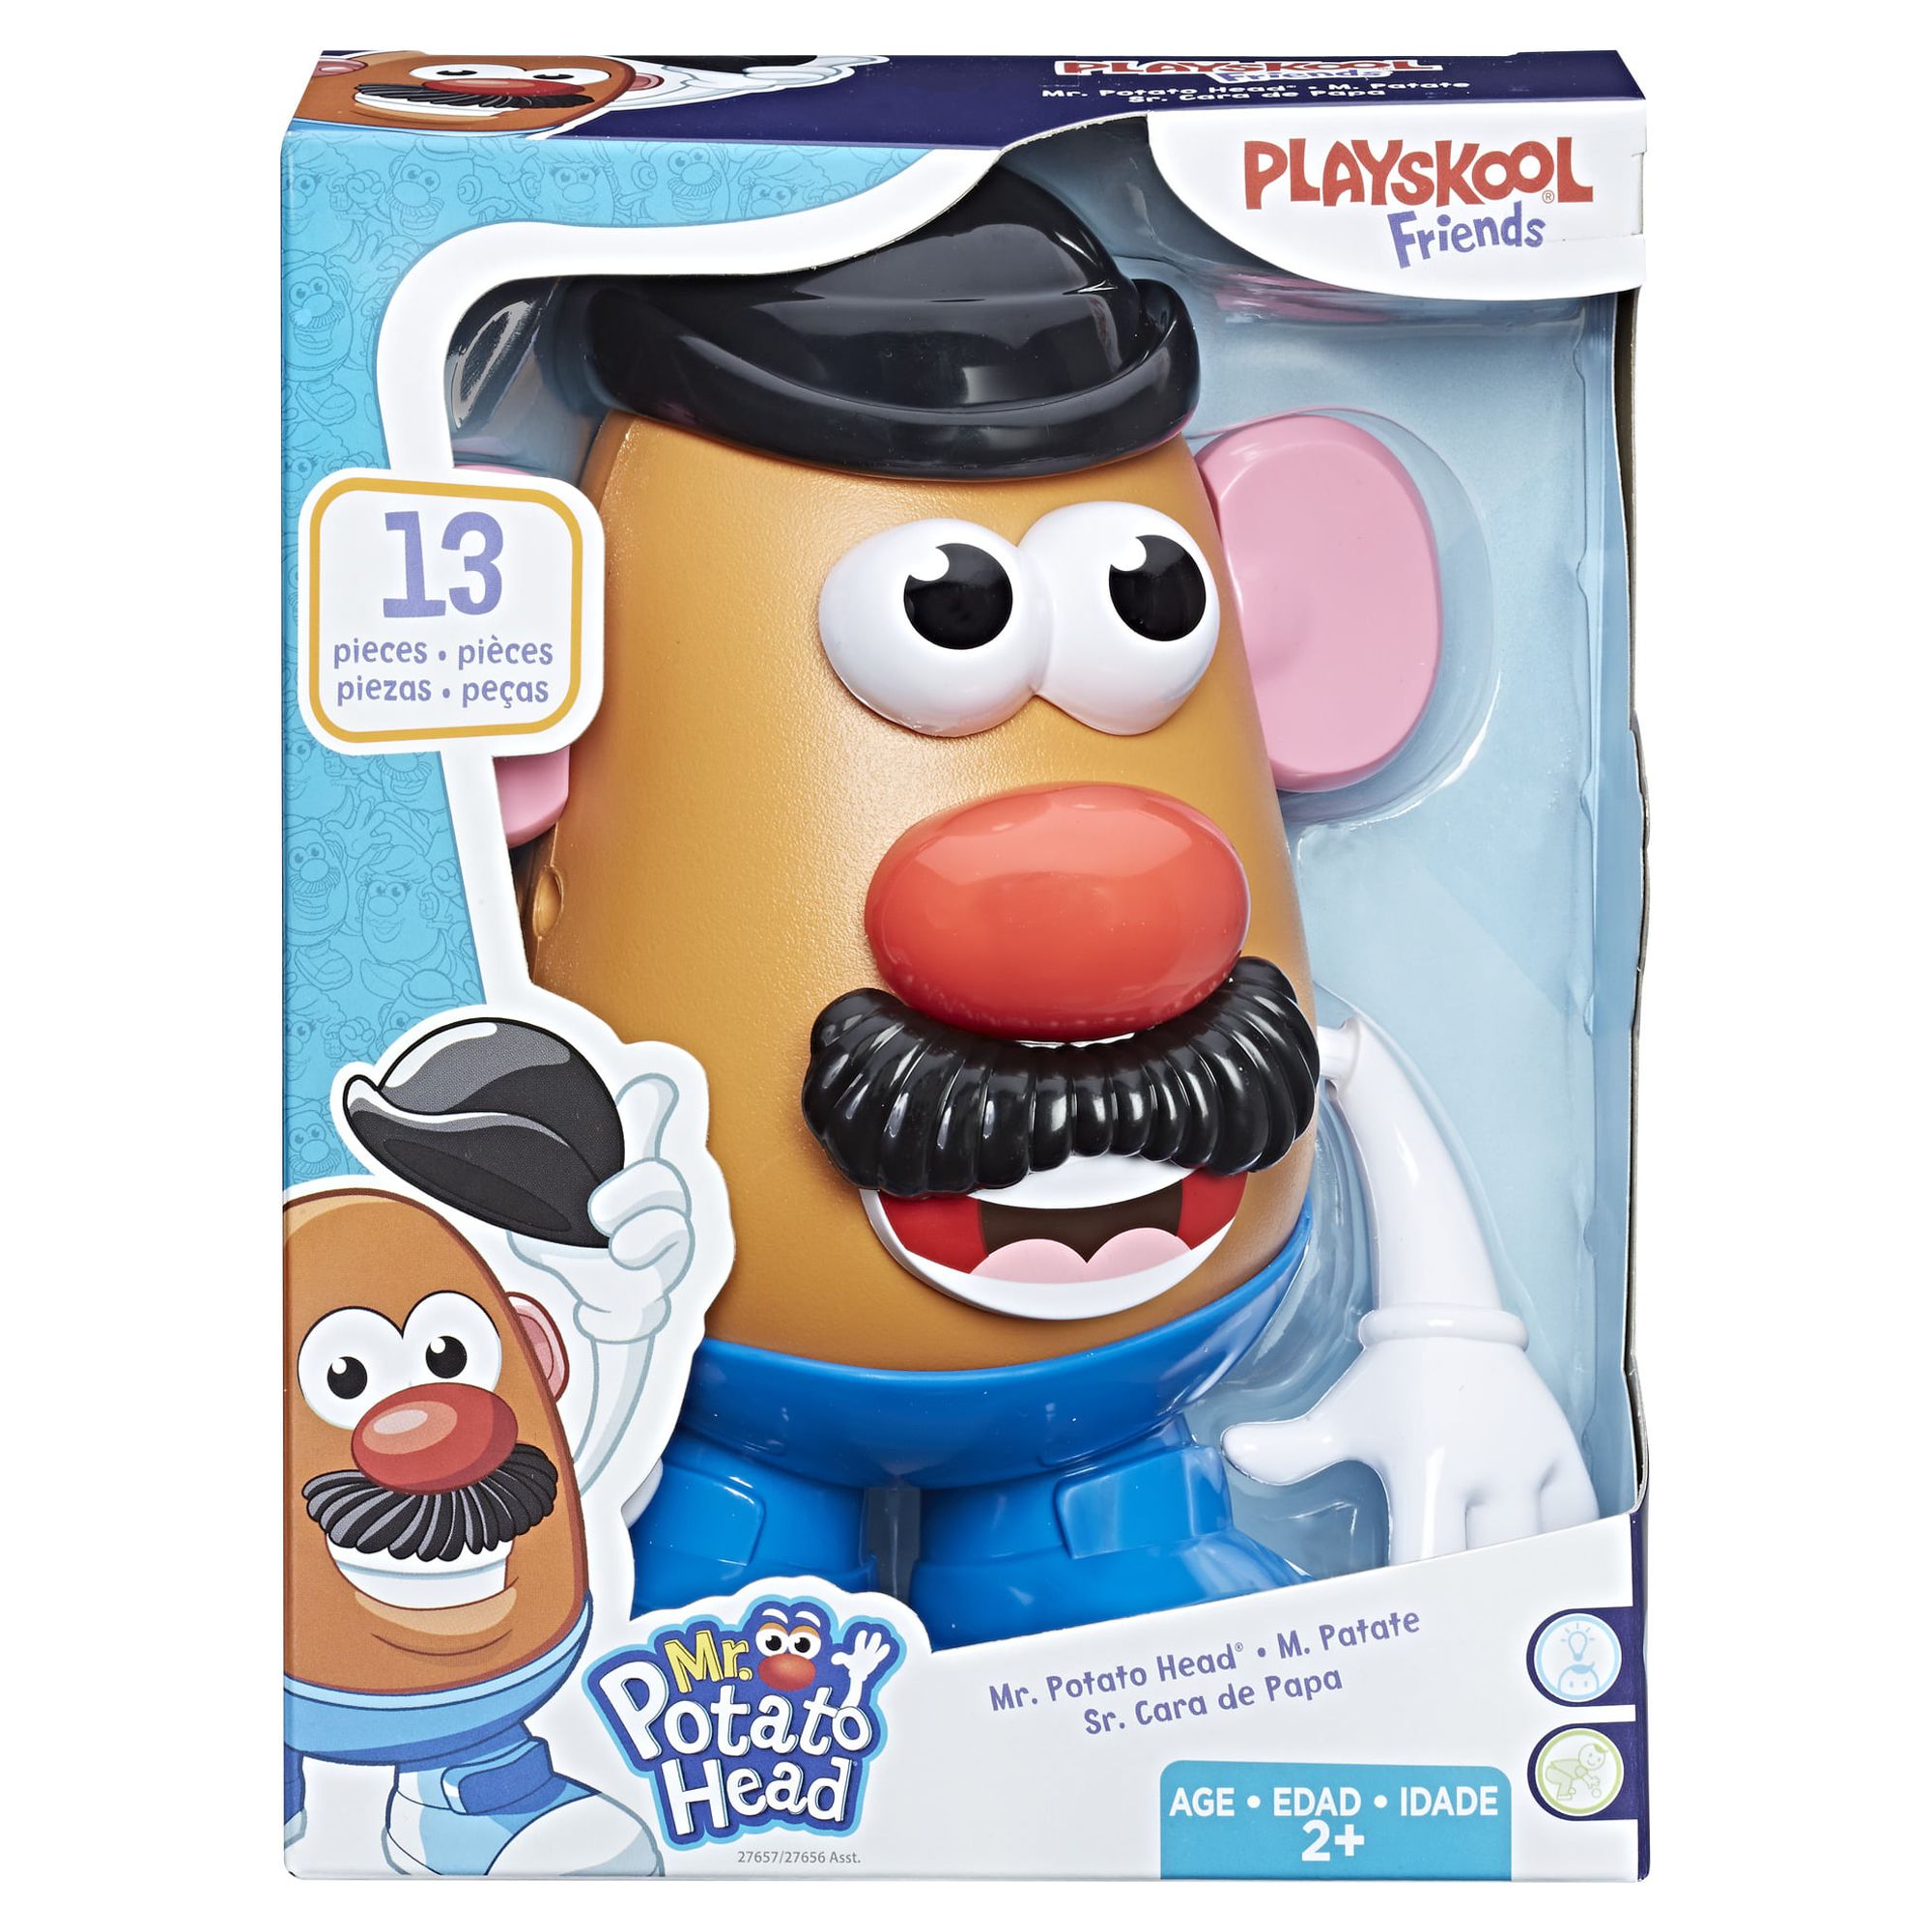 Mr. Potato Head: Playskool Friends Potato Head Kids Toy Action Figure for Boys and Girls Ages 2 3 4 5 6 7 and Up (5.5”) - image 3 of 8